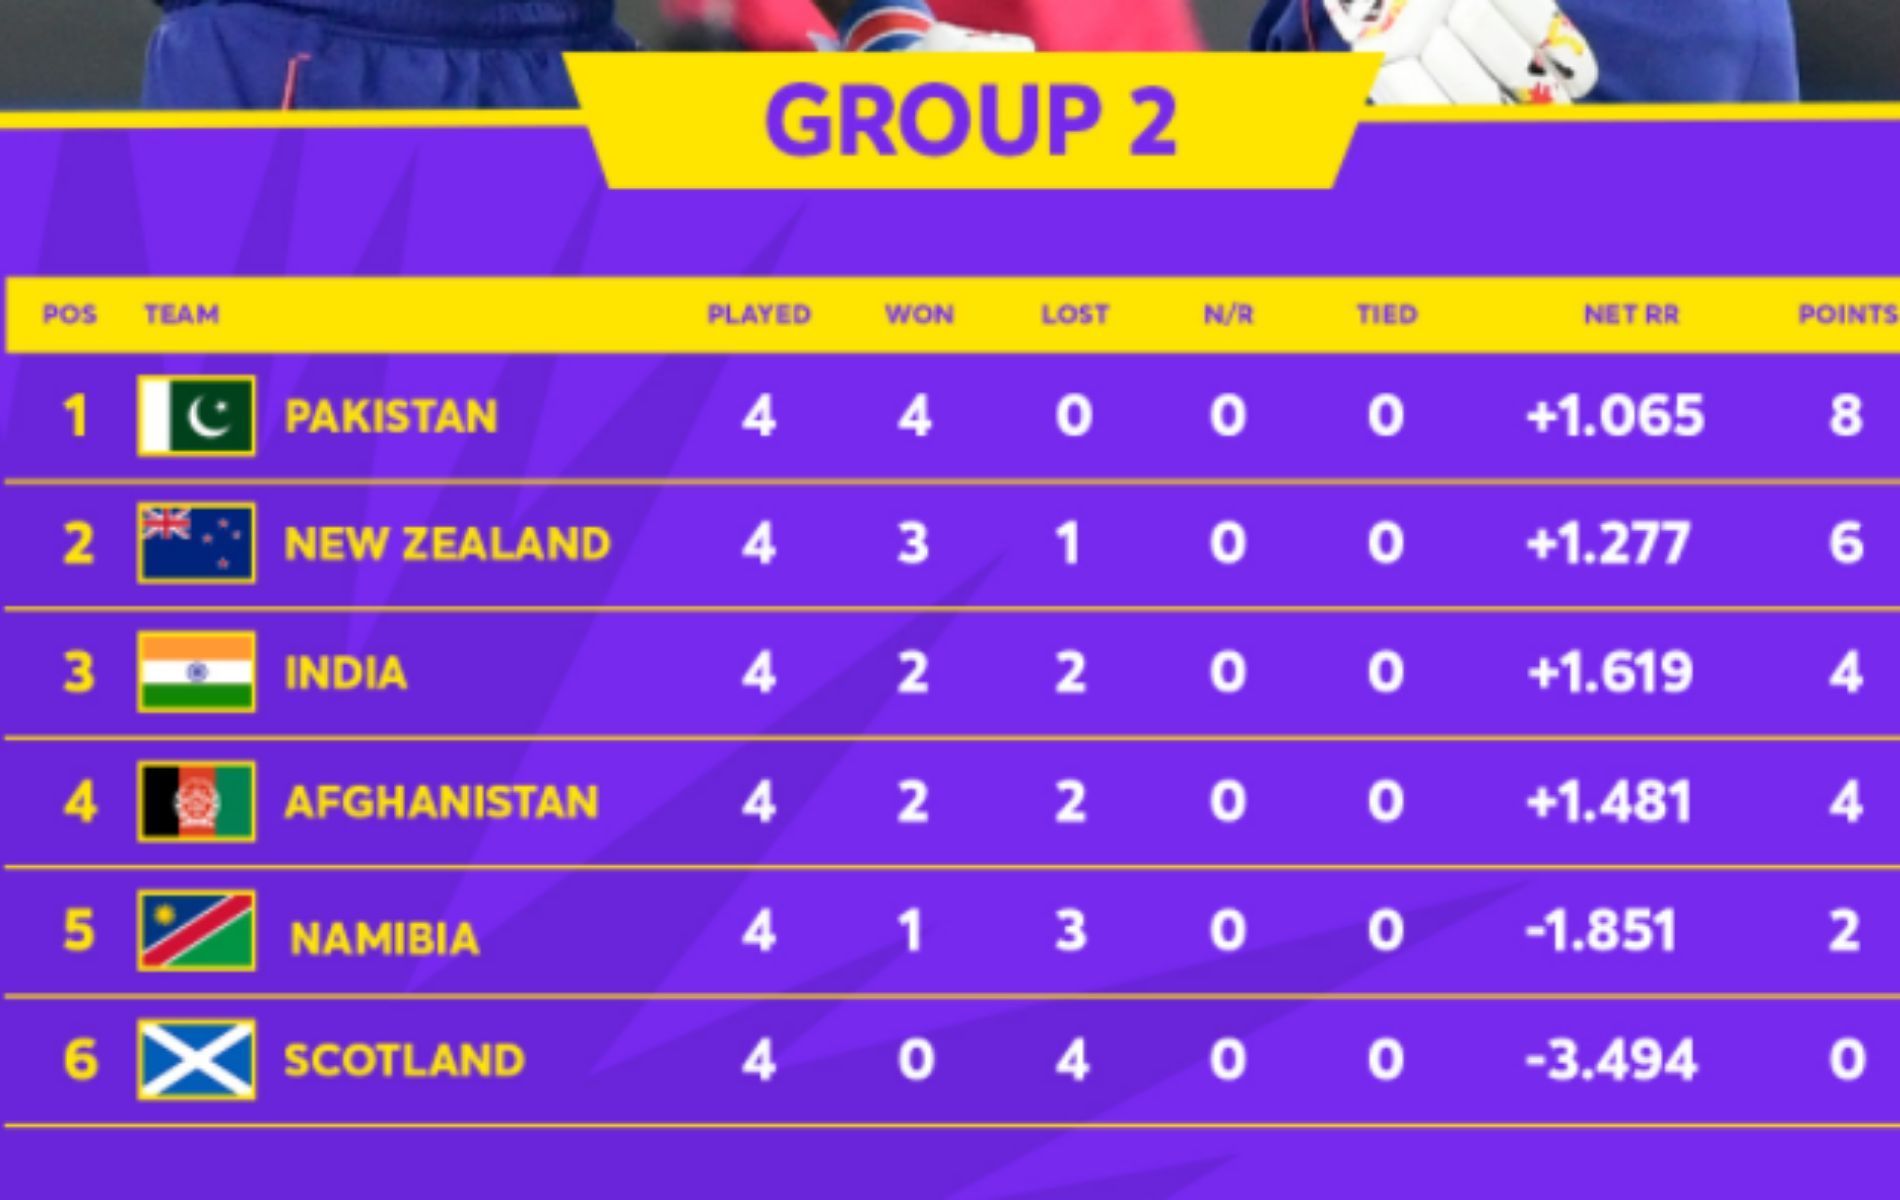 T20 World Cup 2021 Super 12 Group 2 Points Table updated after Friday&#039;s matches (Image: T20 World Cup) 